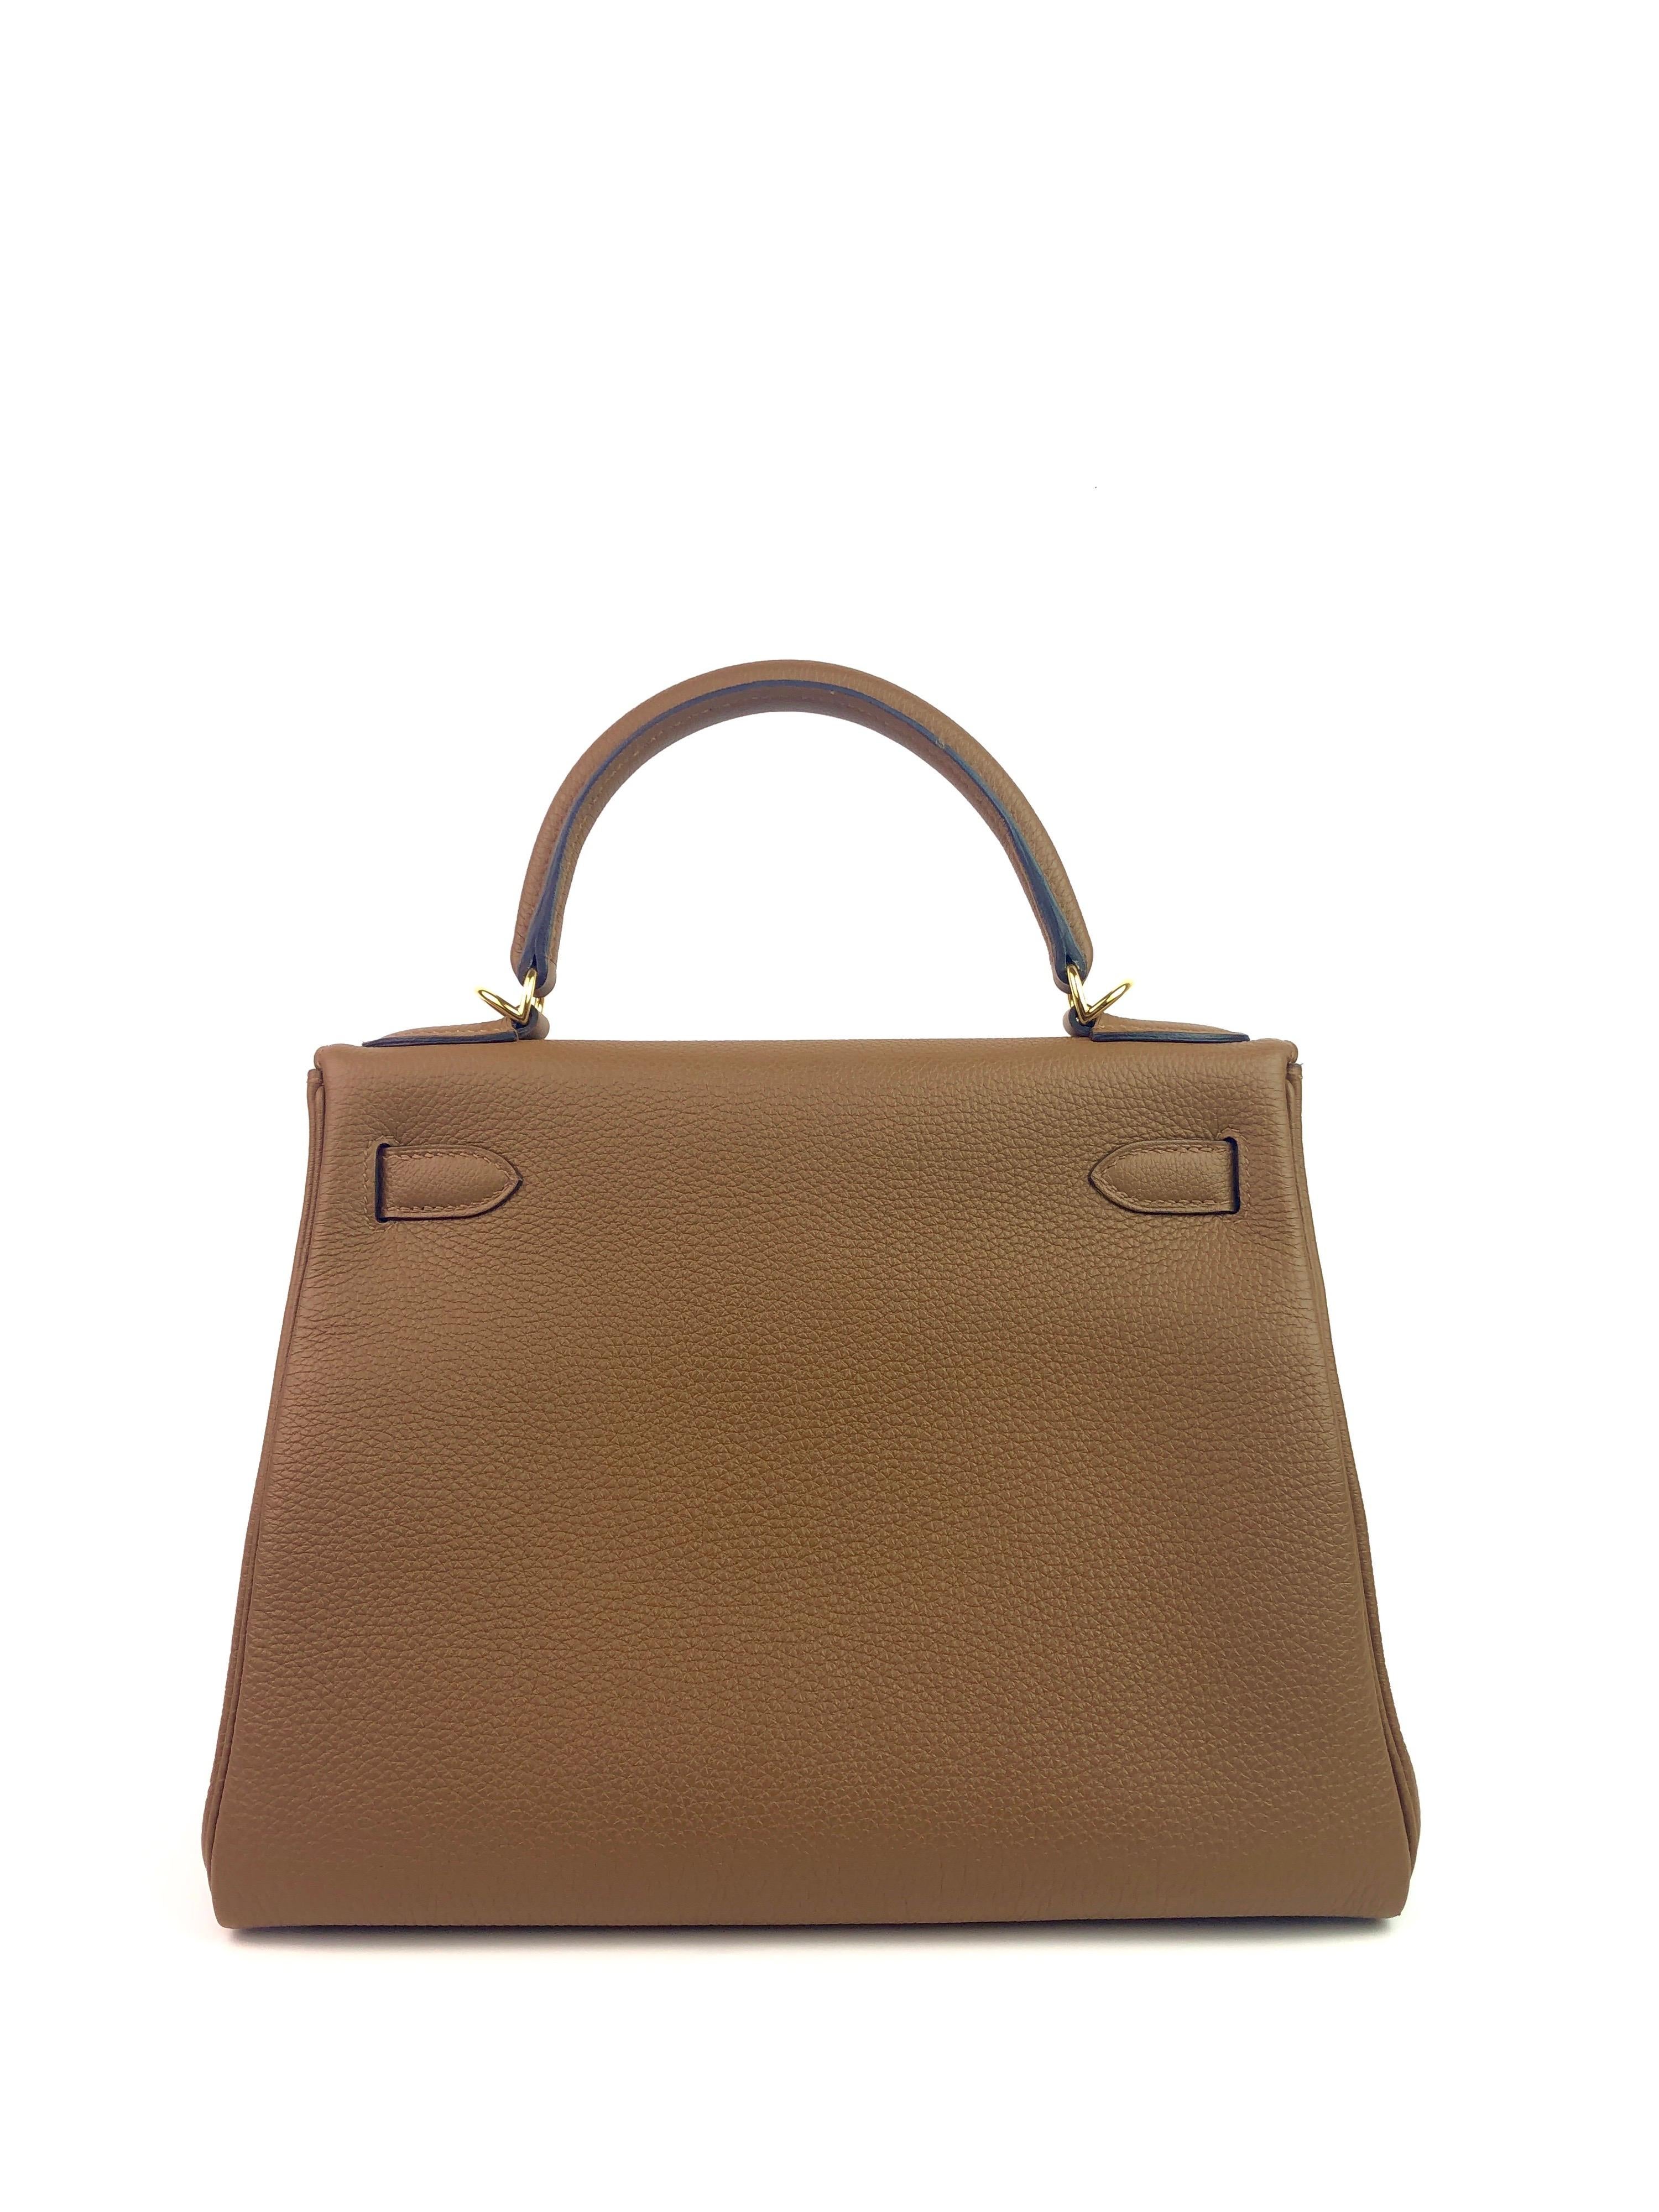 Hermes Kelly 28 Alezan Togo Gold Hardware 2018 In Excellent Condition In Miami, FL